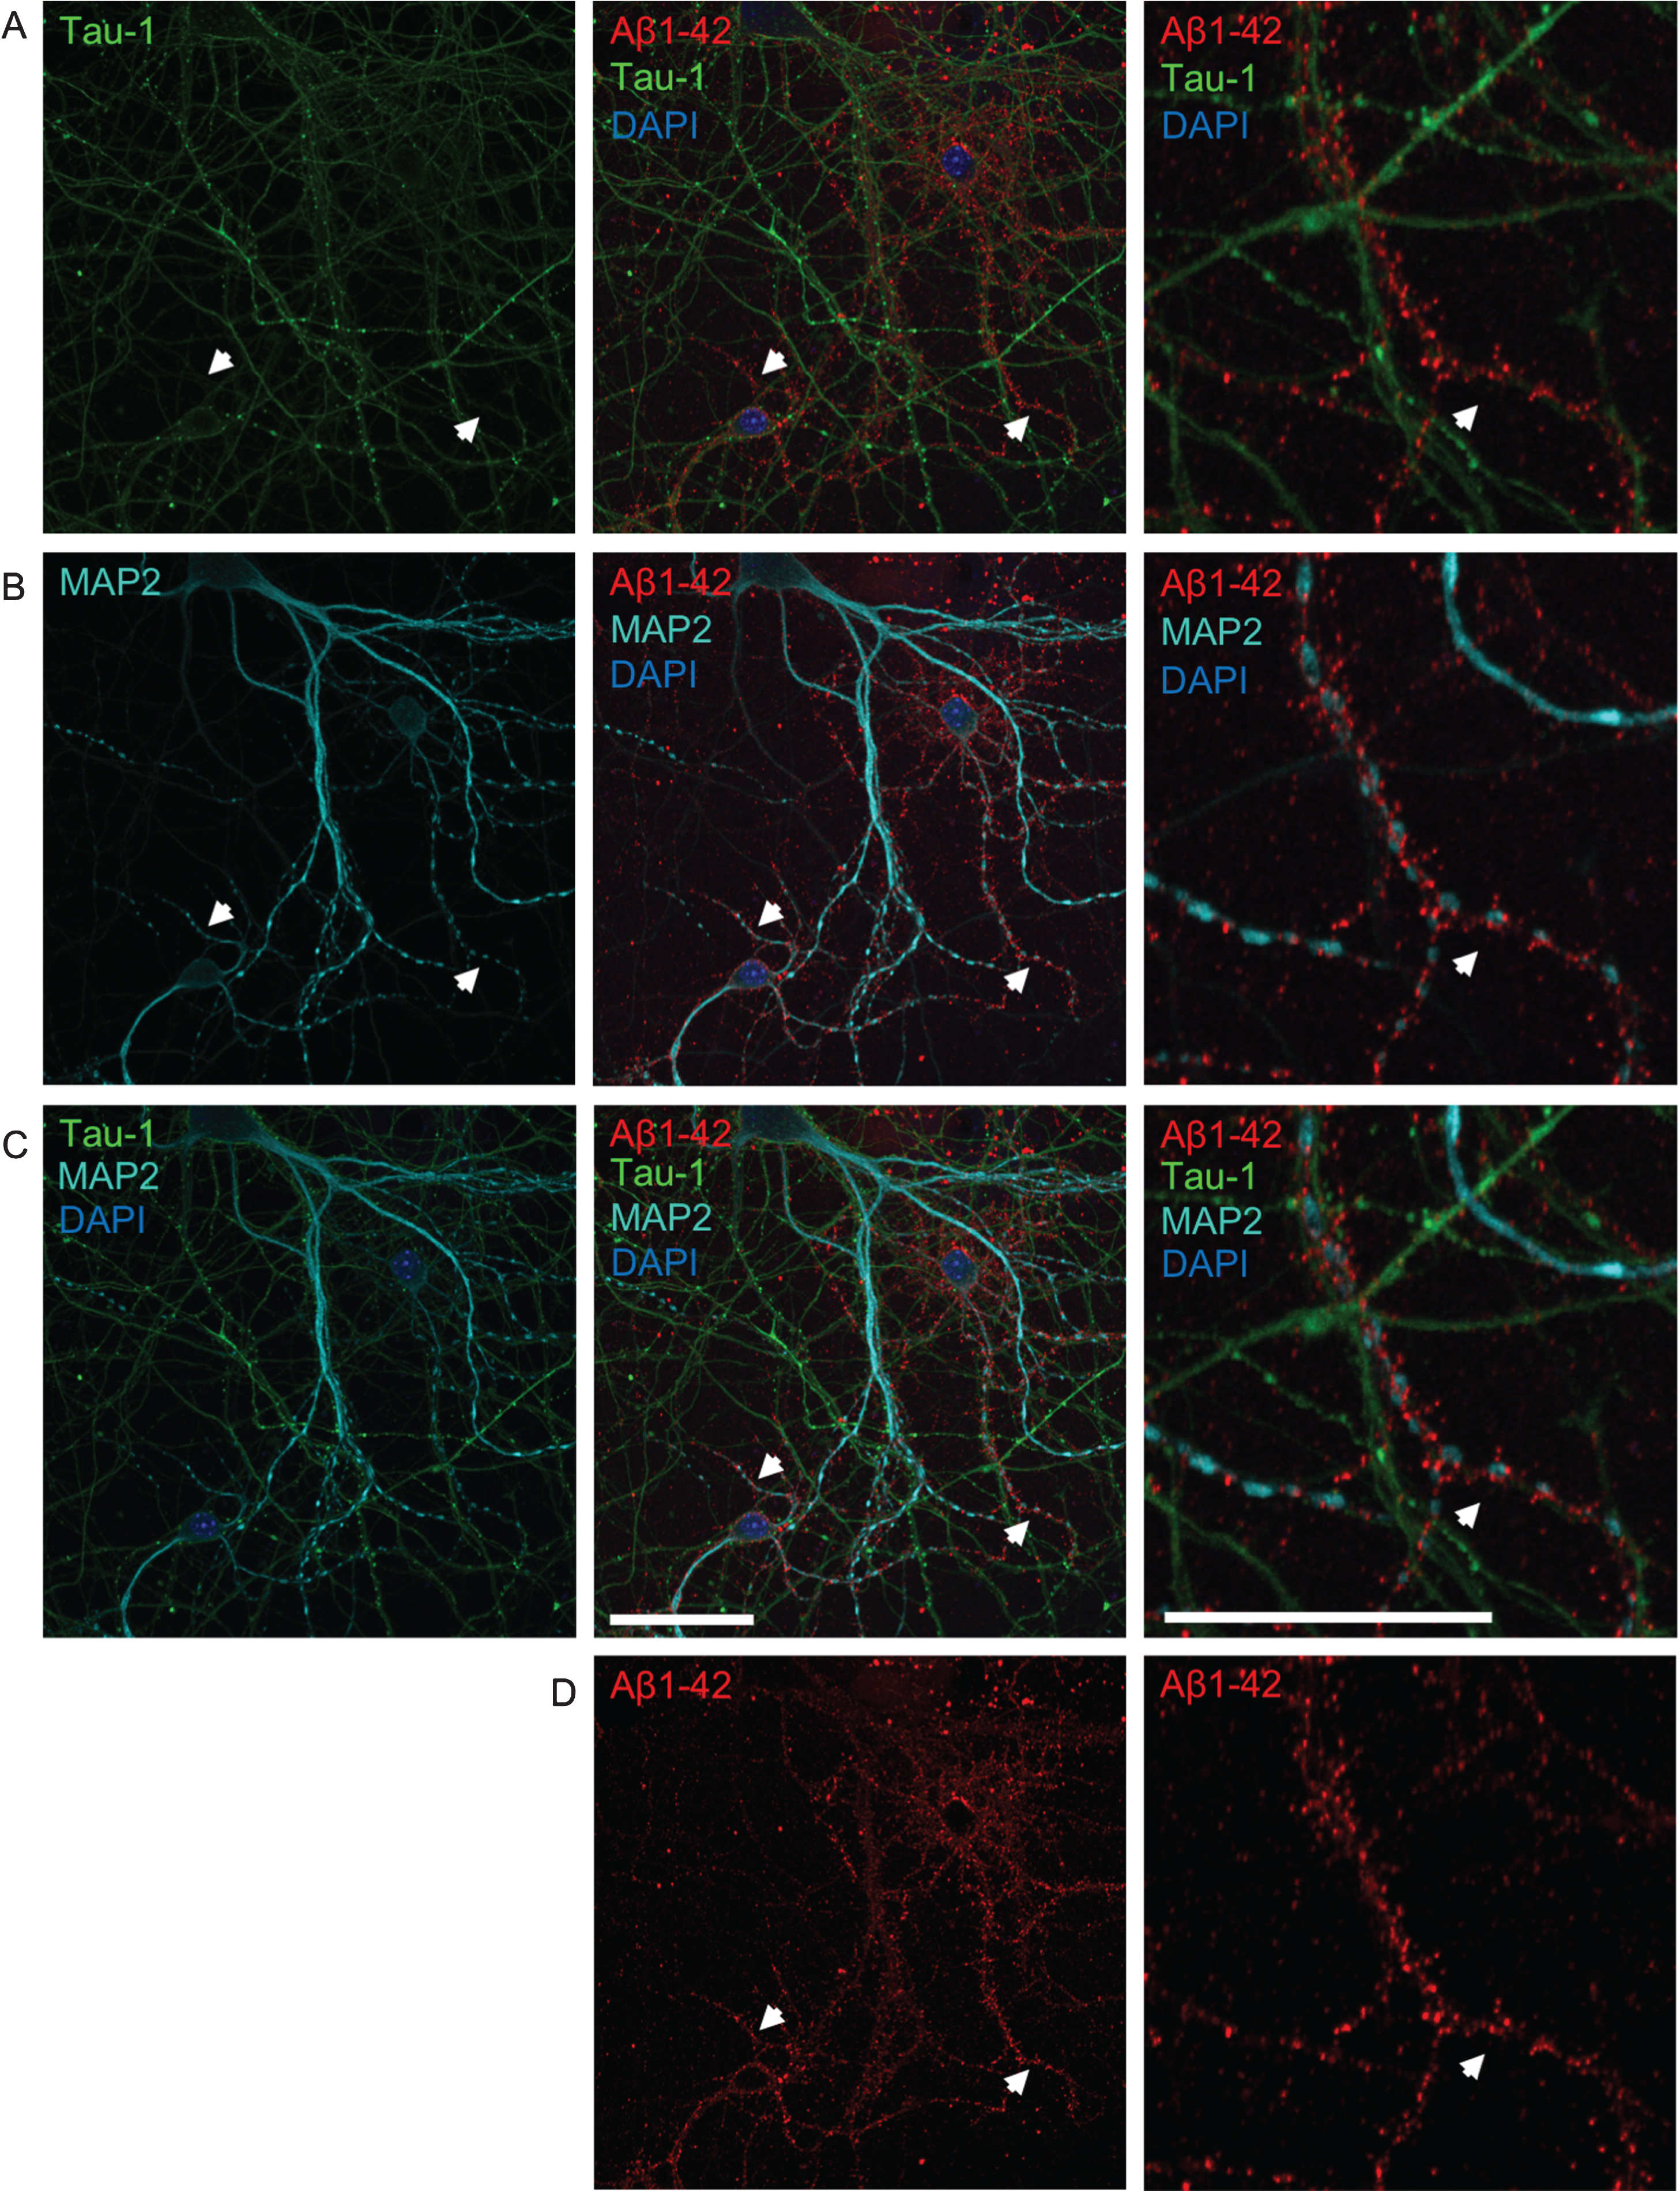 The pattern of Aβ accumulation in neurons is more consistent with dendritic labeling. A-D) Double-labeling with axonal tau-1 (A) and dendritic MAP2 (B) markers of primary neurons treated with 0.5 μM of fluorescently tagged Aβ1 - 42 (Aβ555) for 30 min. All images show the same field of view. Merged images of both tau-1, MAP2, Aβ1 - 42, and DAPI are shown in row C. The panel to the far right show higher magnification images of the middle panel. The pattern of Aβ labeling (shown separately in row D) is more consistent with that of dendritic MAP2 than tau-1 labeling. White arrows denote MAP2-positive dendrites accumulating Aβ555, which are not positive for tau-1. High magnification images (right) show tau-1-positive axons devoid of Aβ555. Scale bars 50 μm.